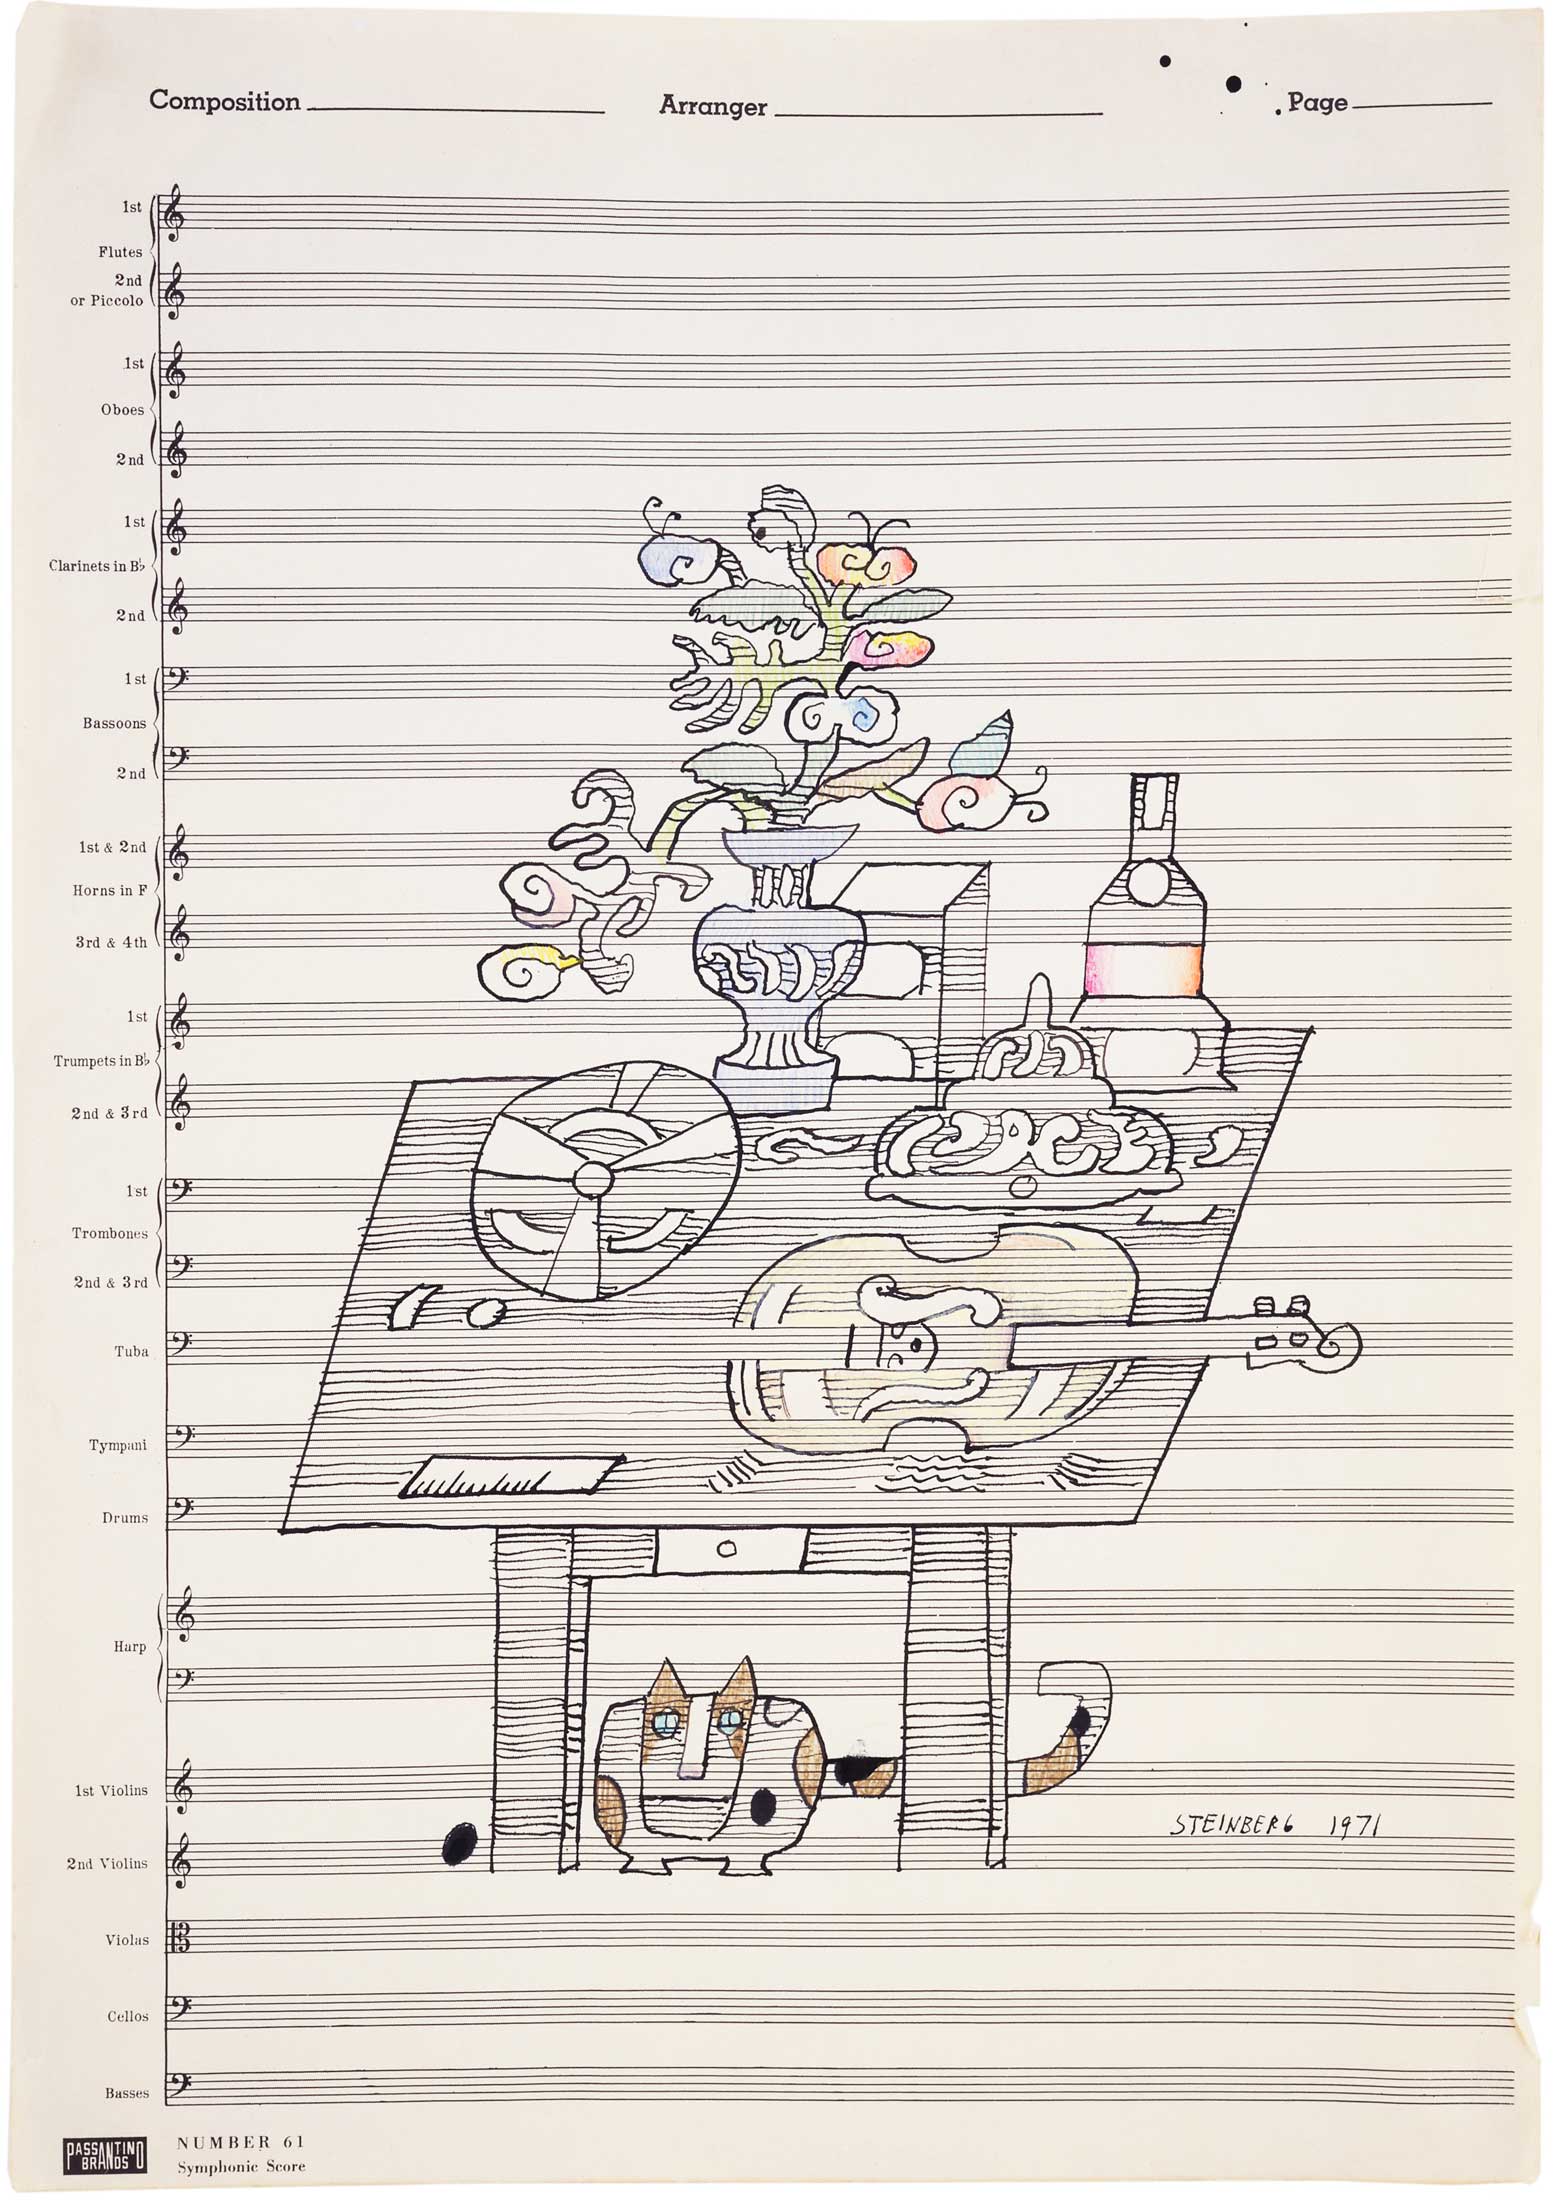 <em>Untitled</em>, 1971. Ink with crayon and colored pencil on sheet music paper, 14 ¼ x 20 1/8 in. The Art Institute of Chicago; Gift of The Saul Steinberg Foundation.